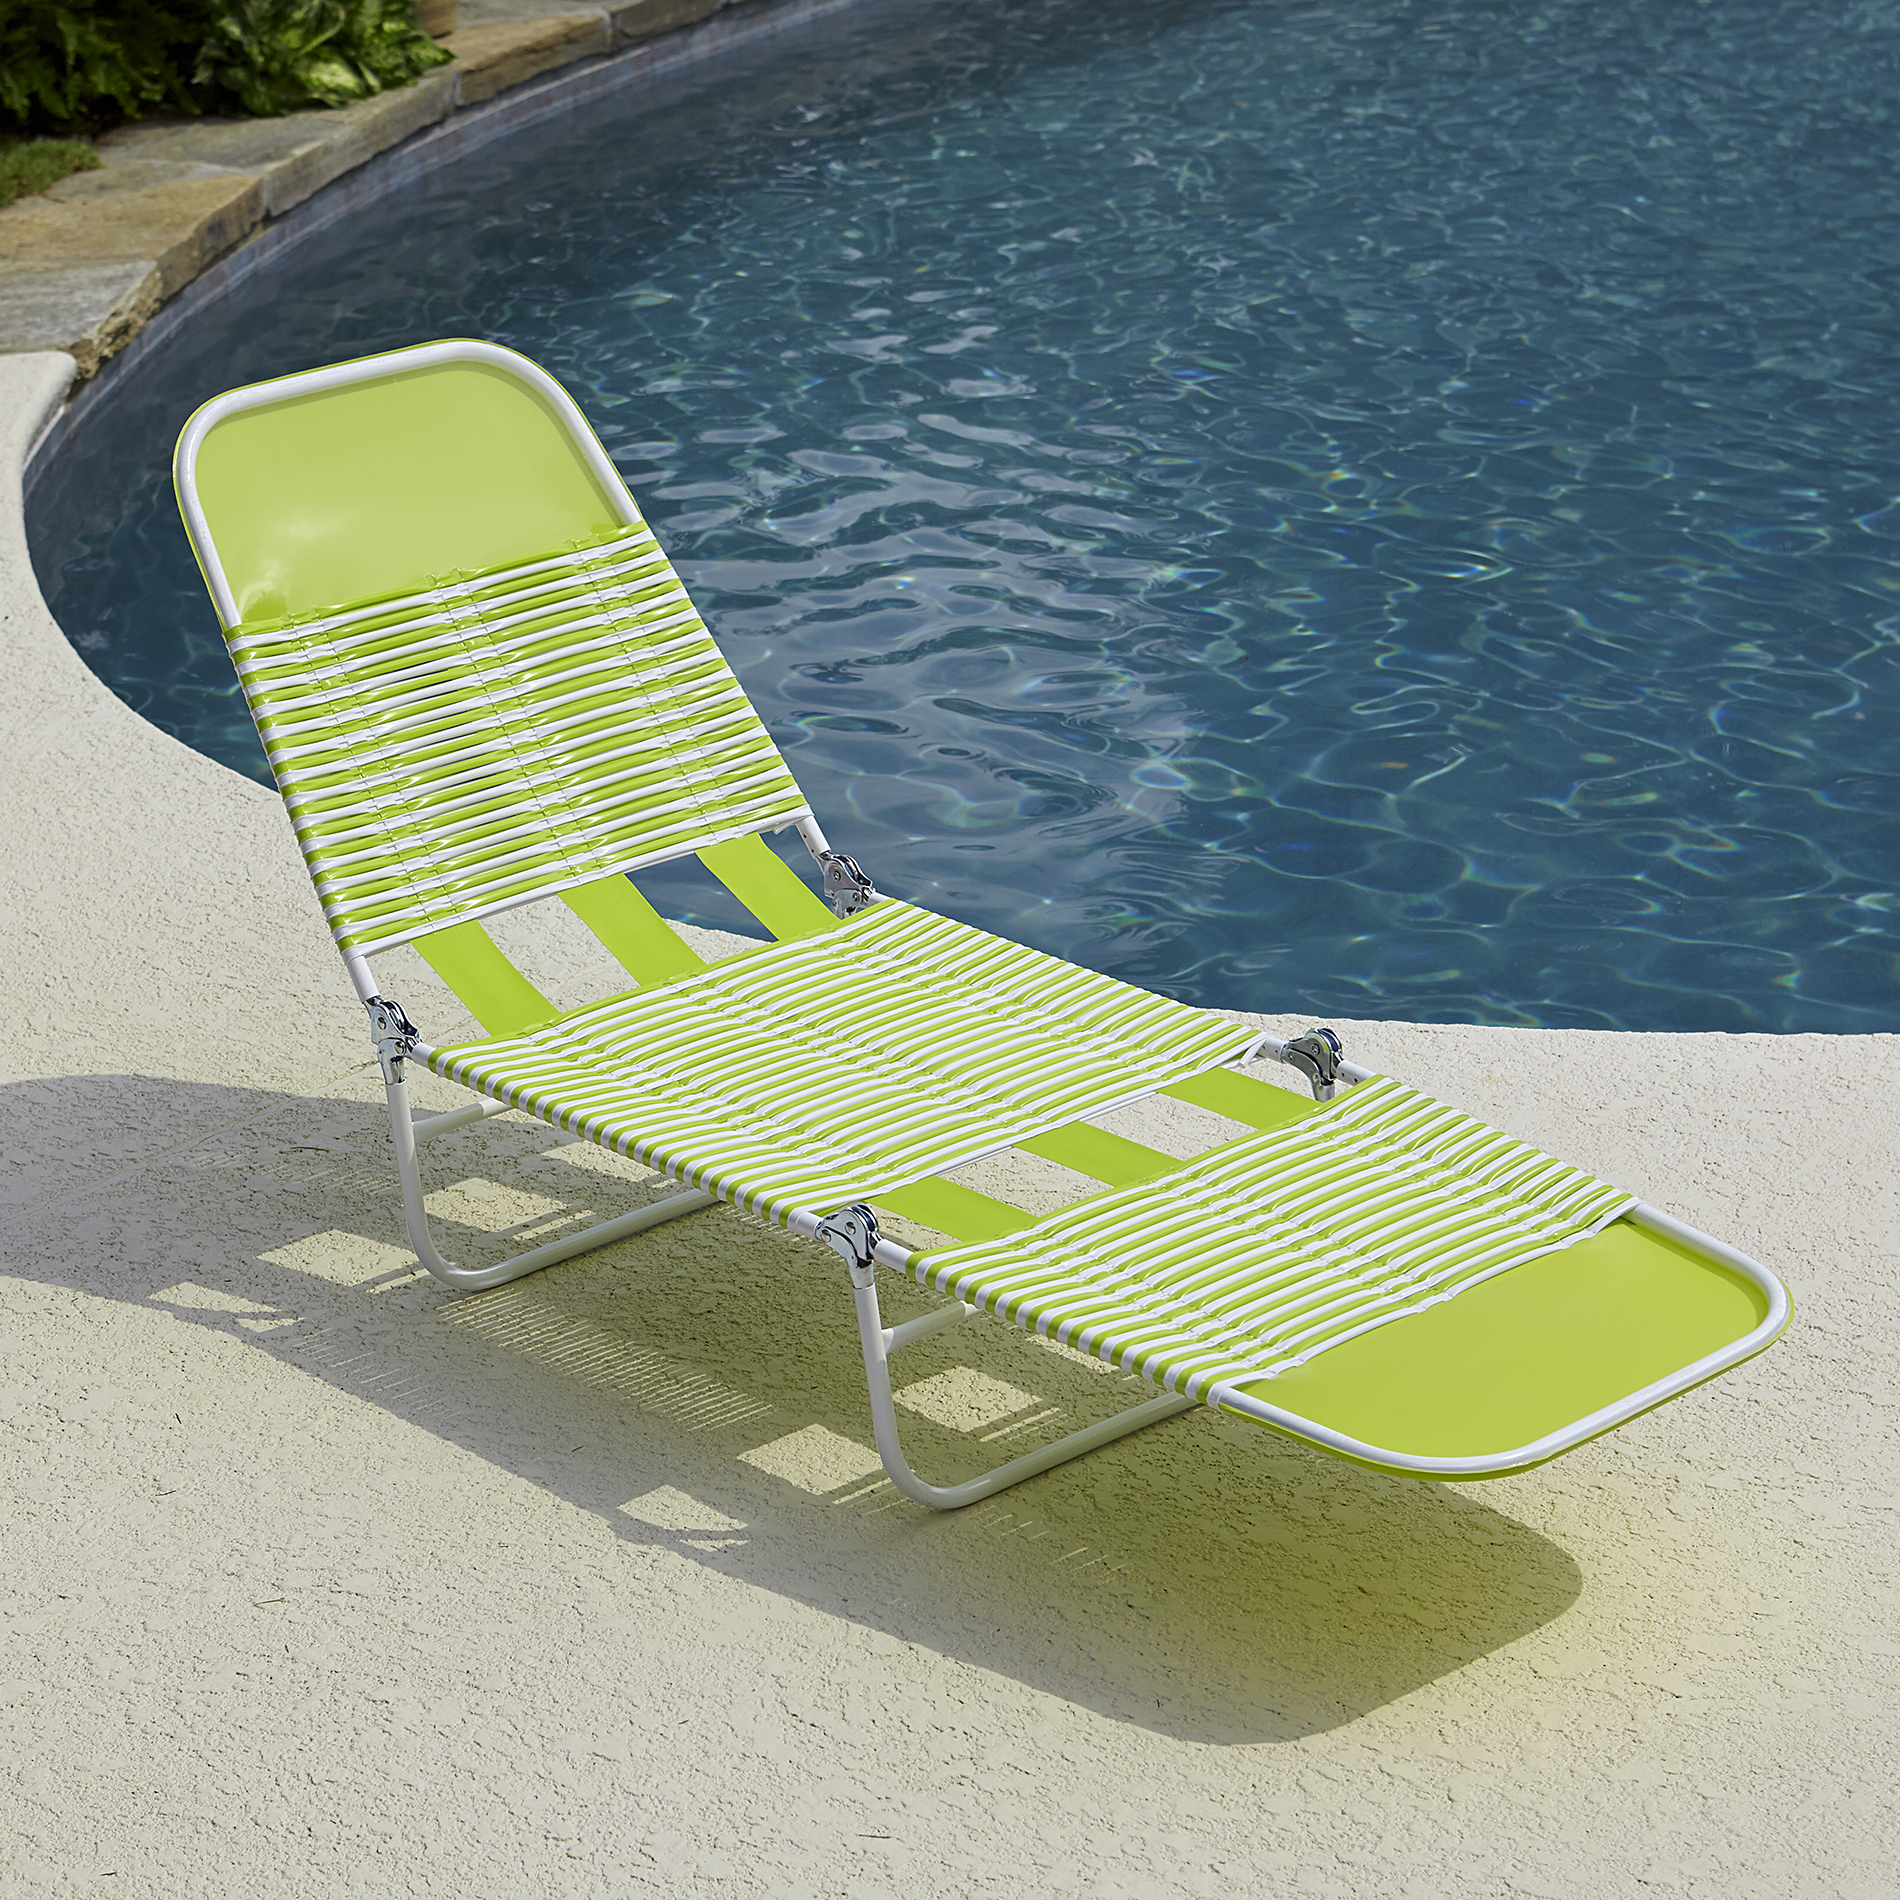 PVC Chaise Lounge- Green - Outdoor Living - Patio Furniture - Chairs